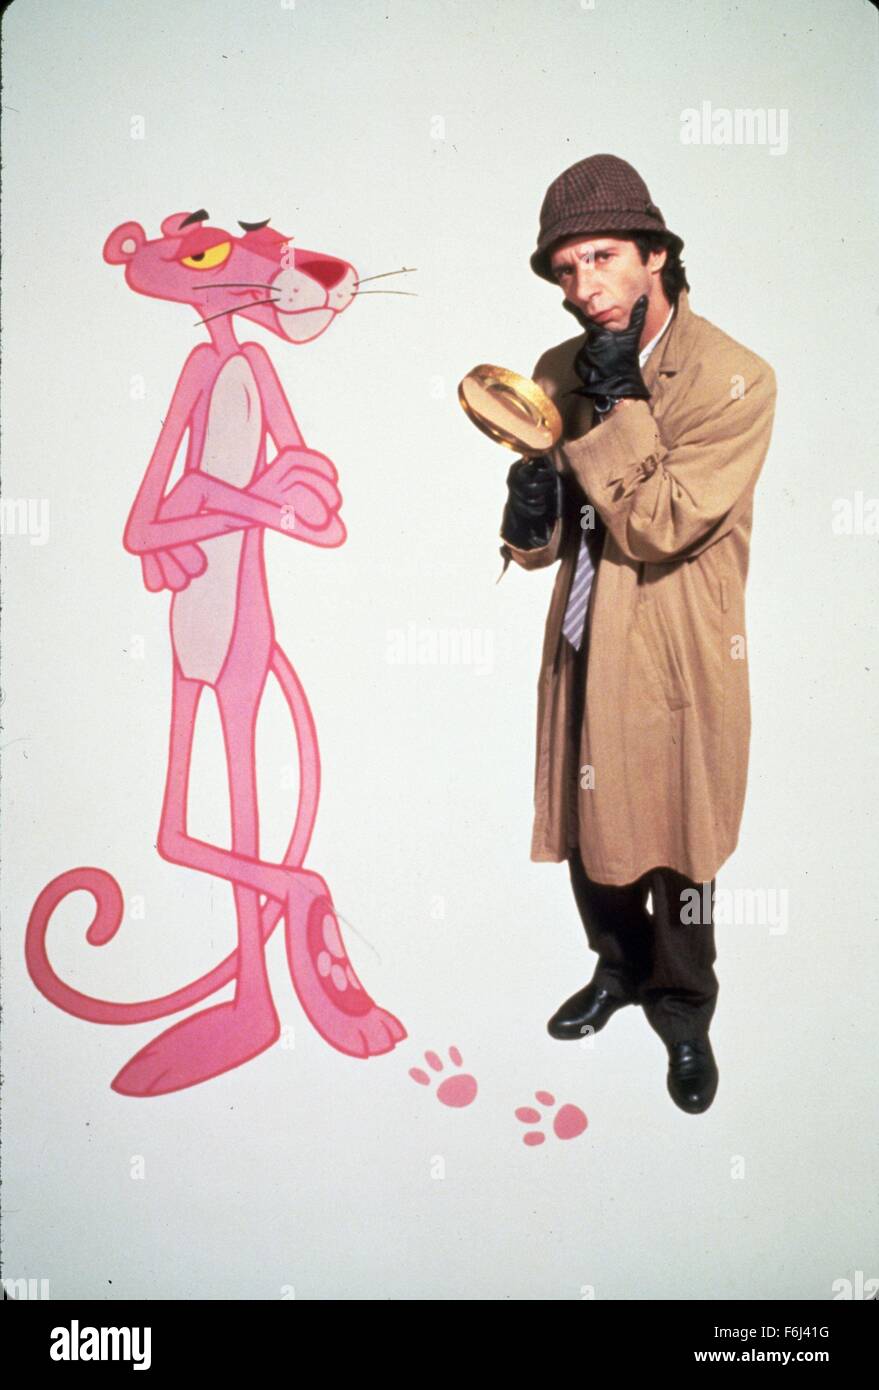 The Art of the Pink Panther Movie Titles